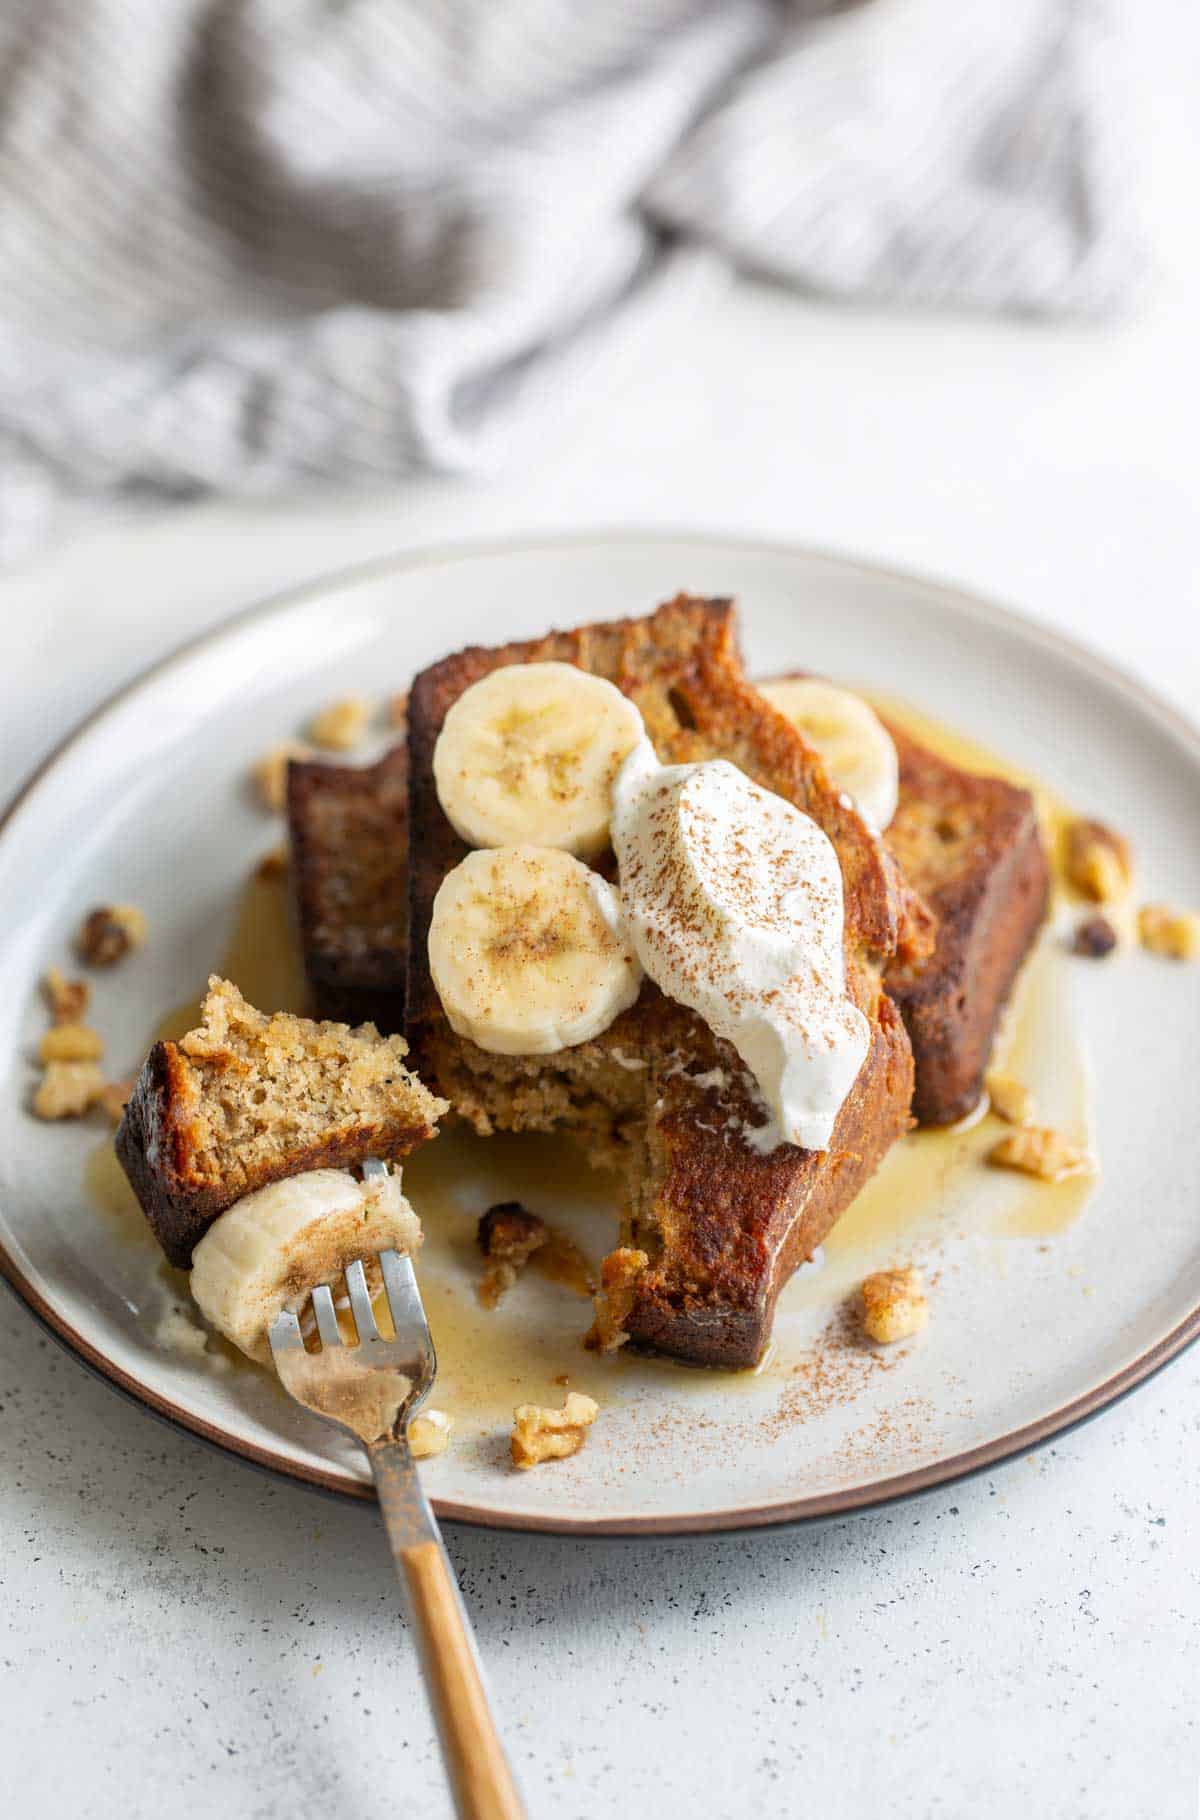 Banana french toast with whipped cream and bananas on a plate.